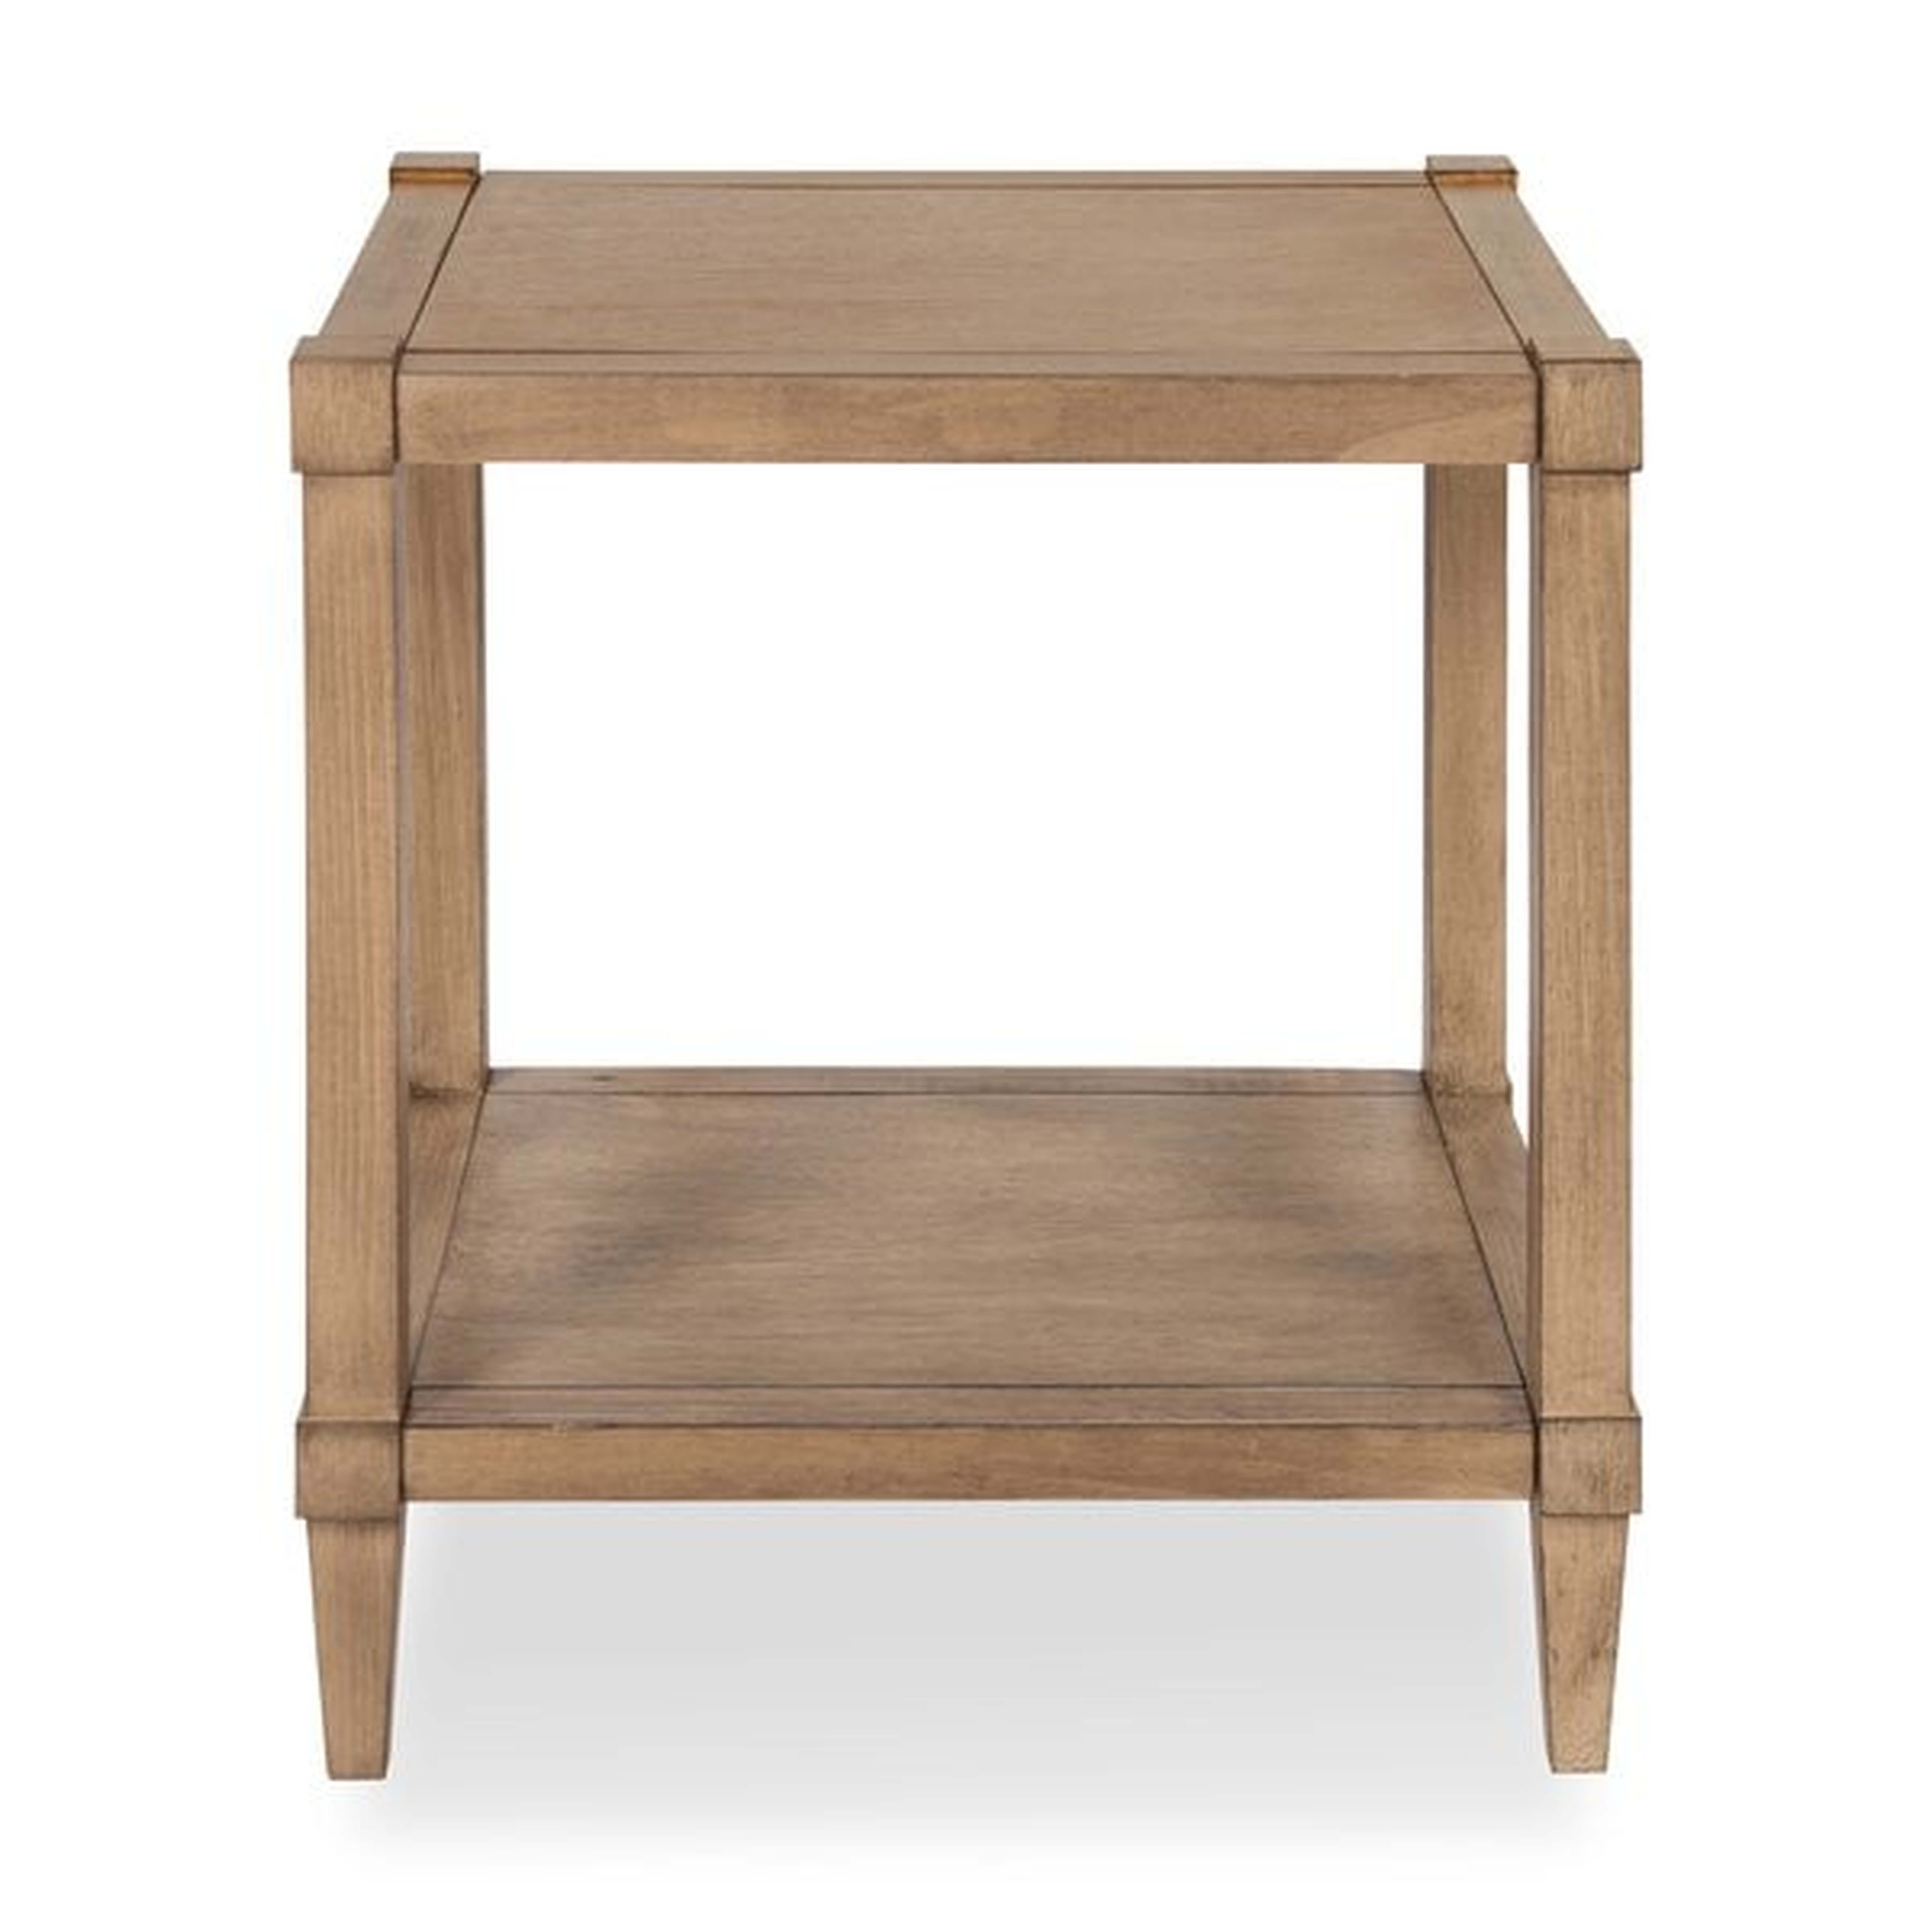 Gretchen Wooden Side Accent End Table, Light Brown - Wayfair